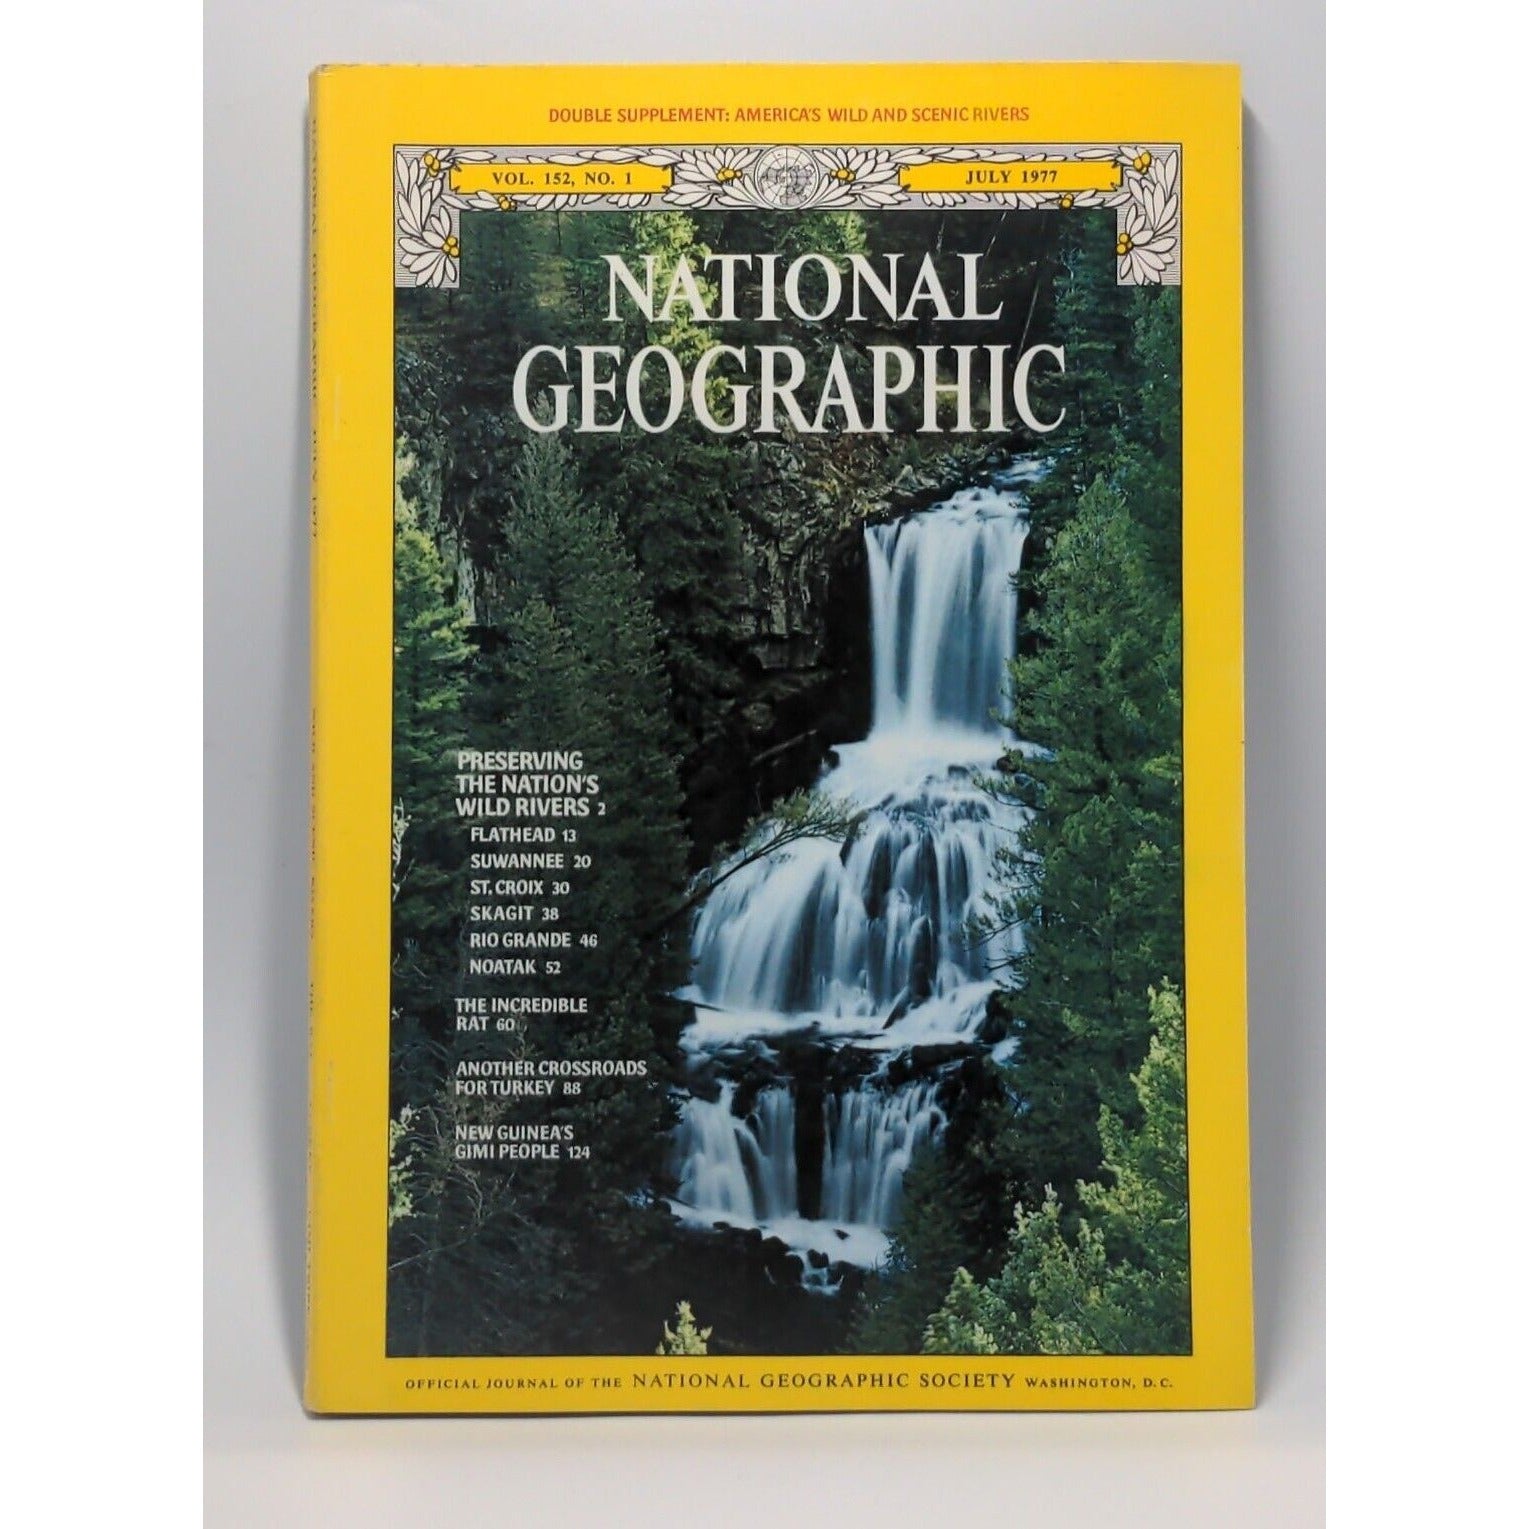 National Geographic July 1977 Vol 152, No.1 - Nation's Wild Rivers, Turkey